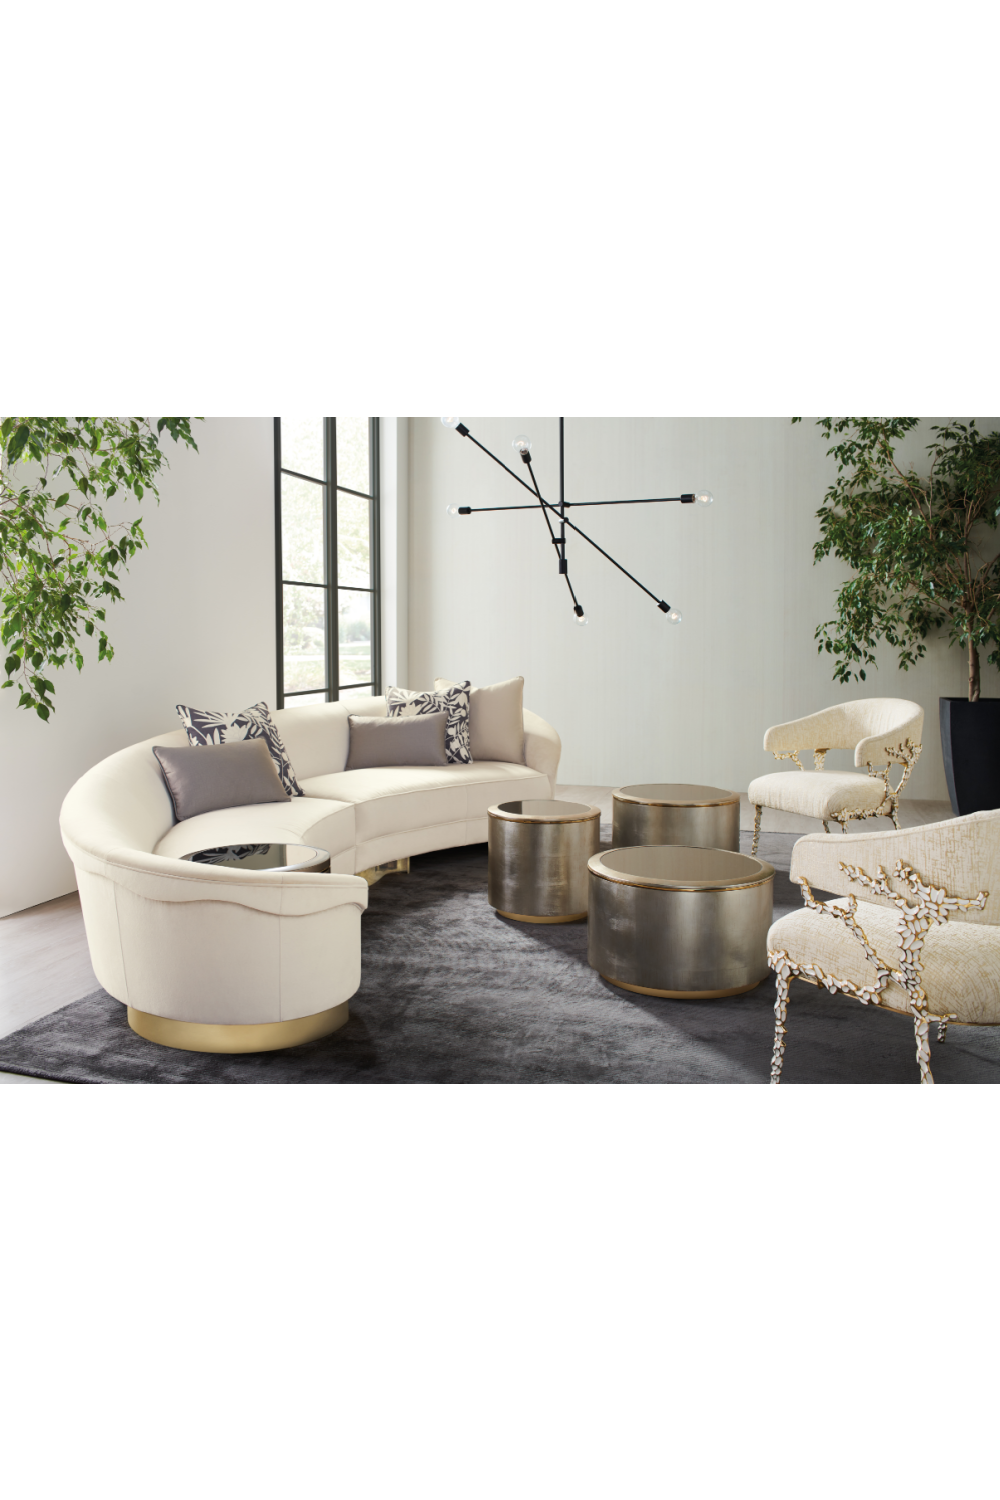 Embellished Modern Armchair | Caracole Glimmer of Home | Oroa.com